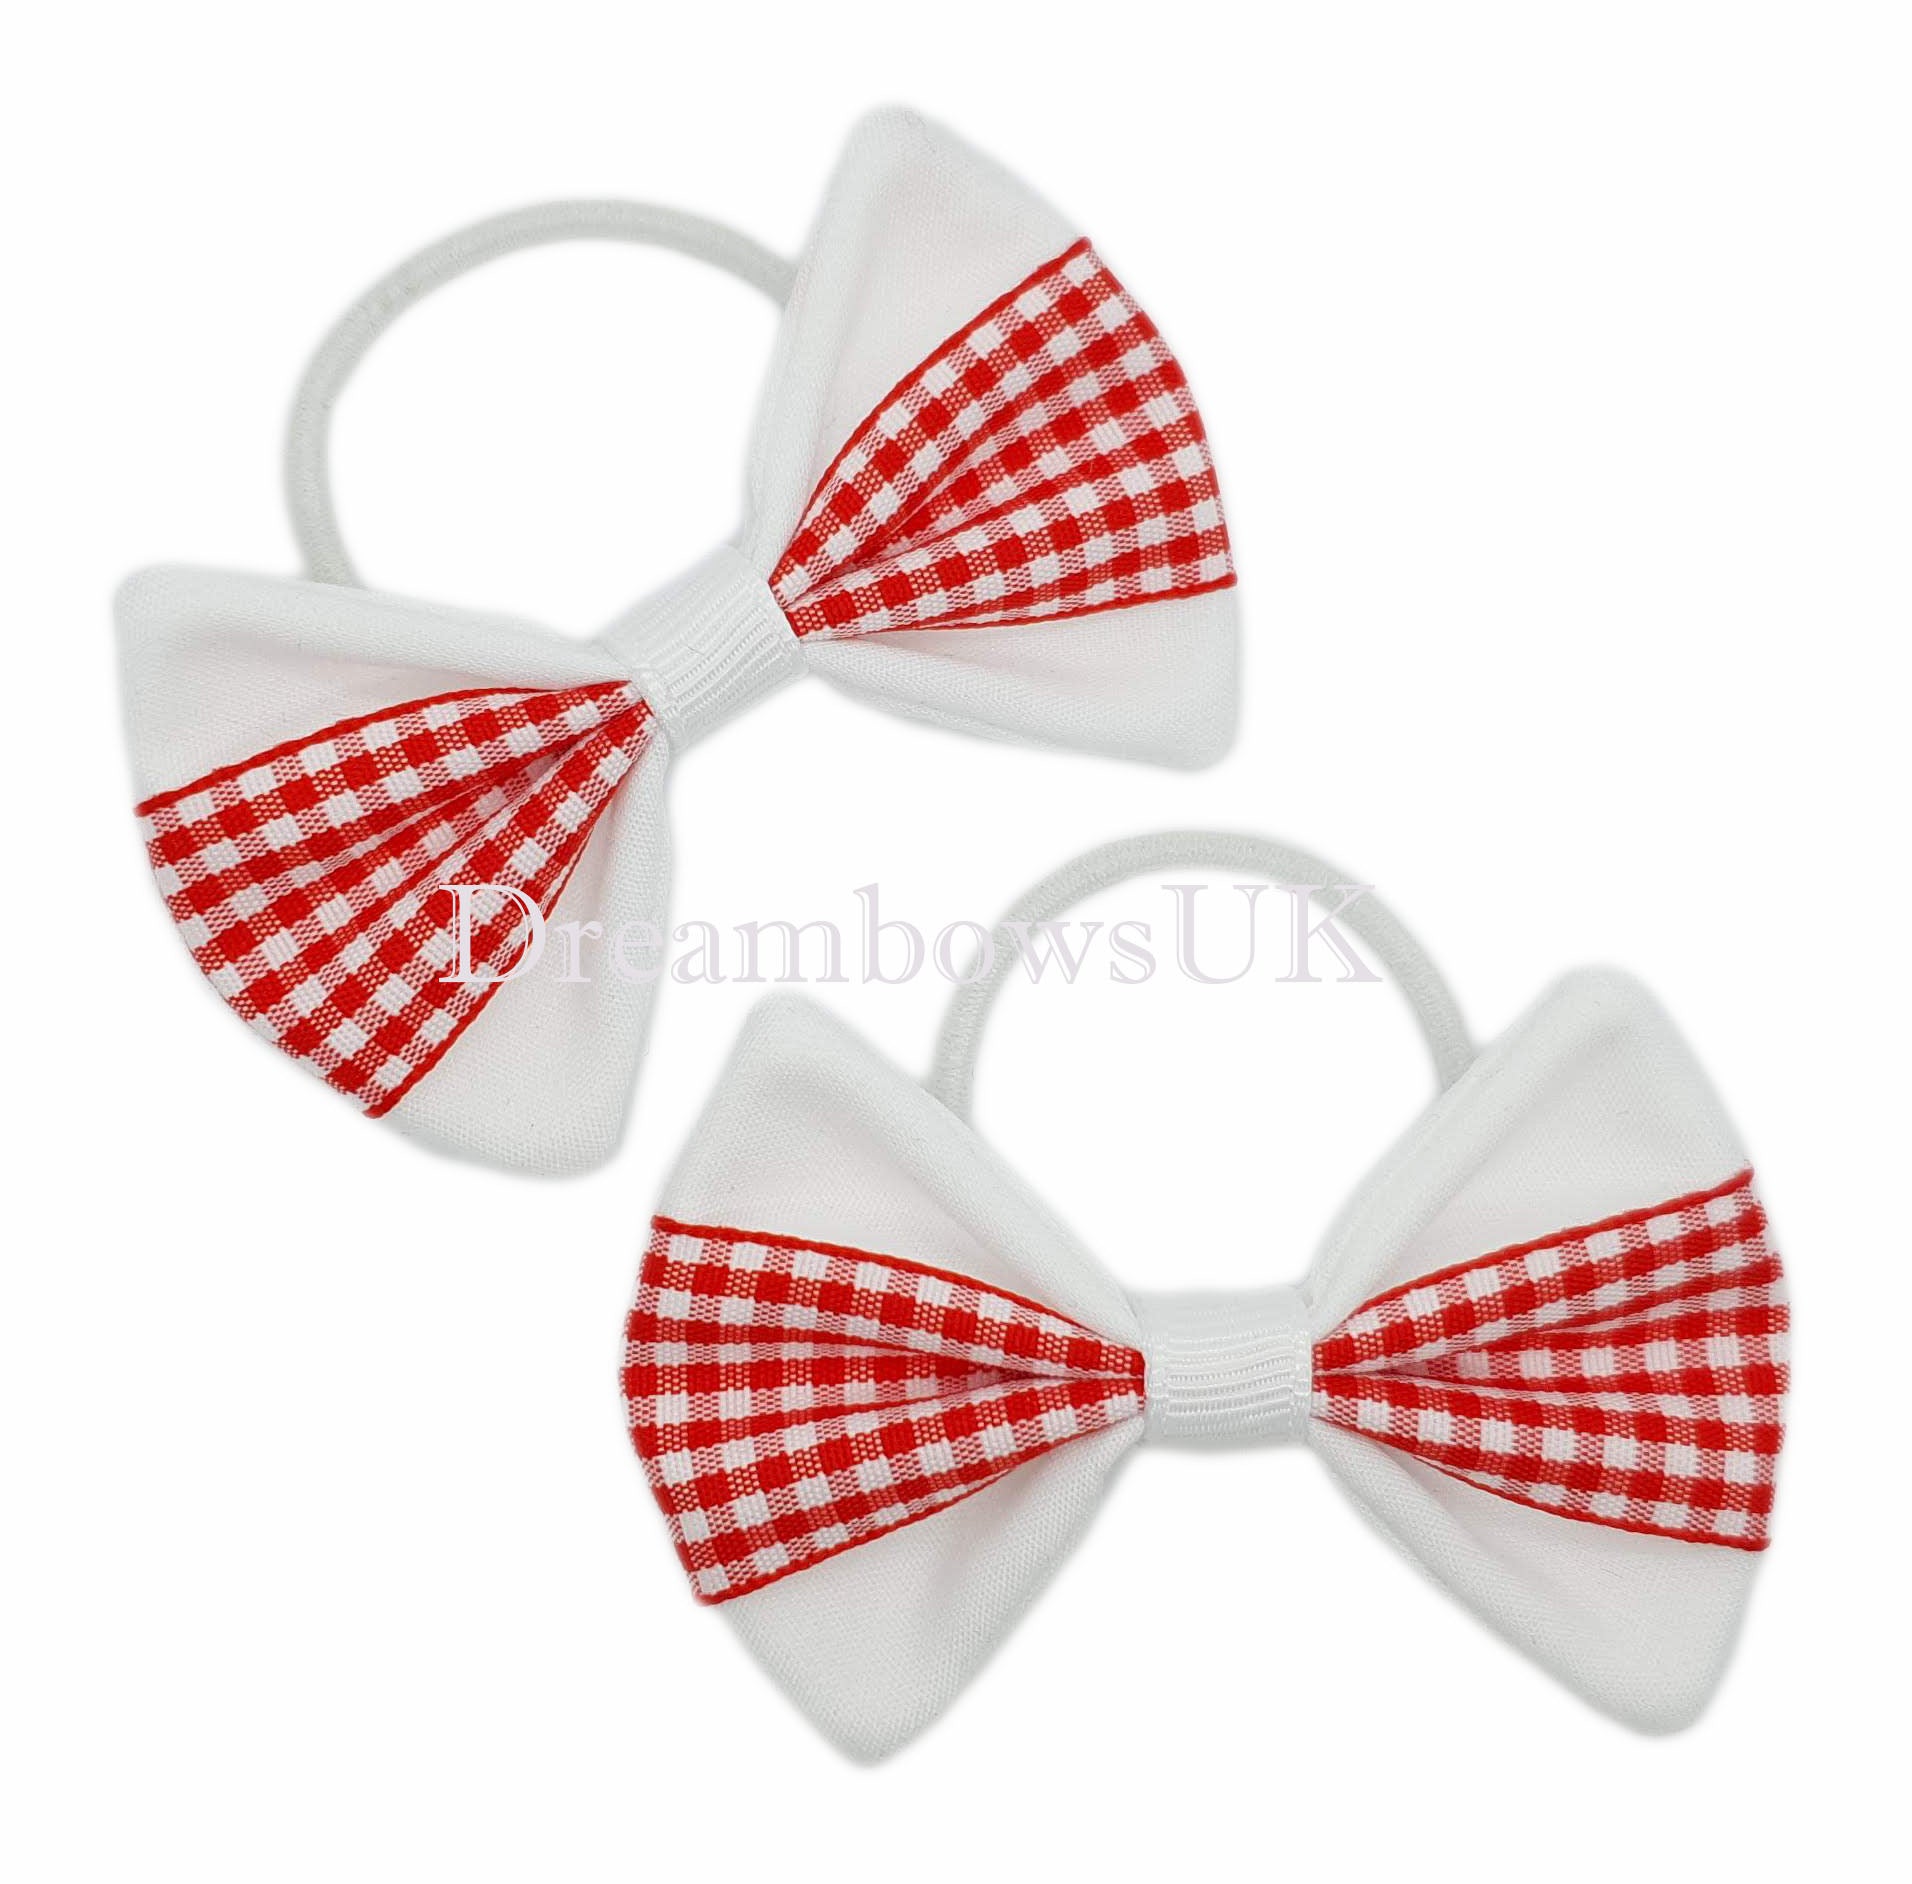 2x Red gingham hair bows on thick hair ties